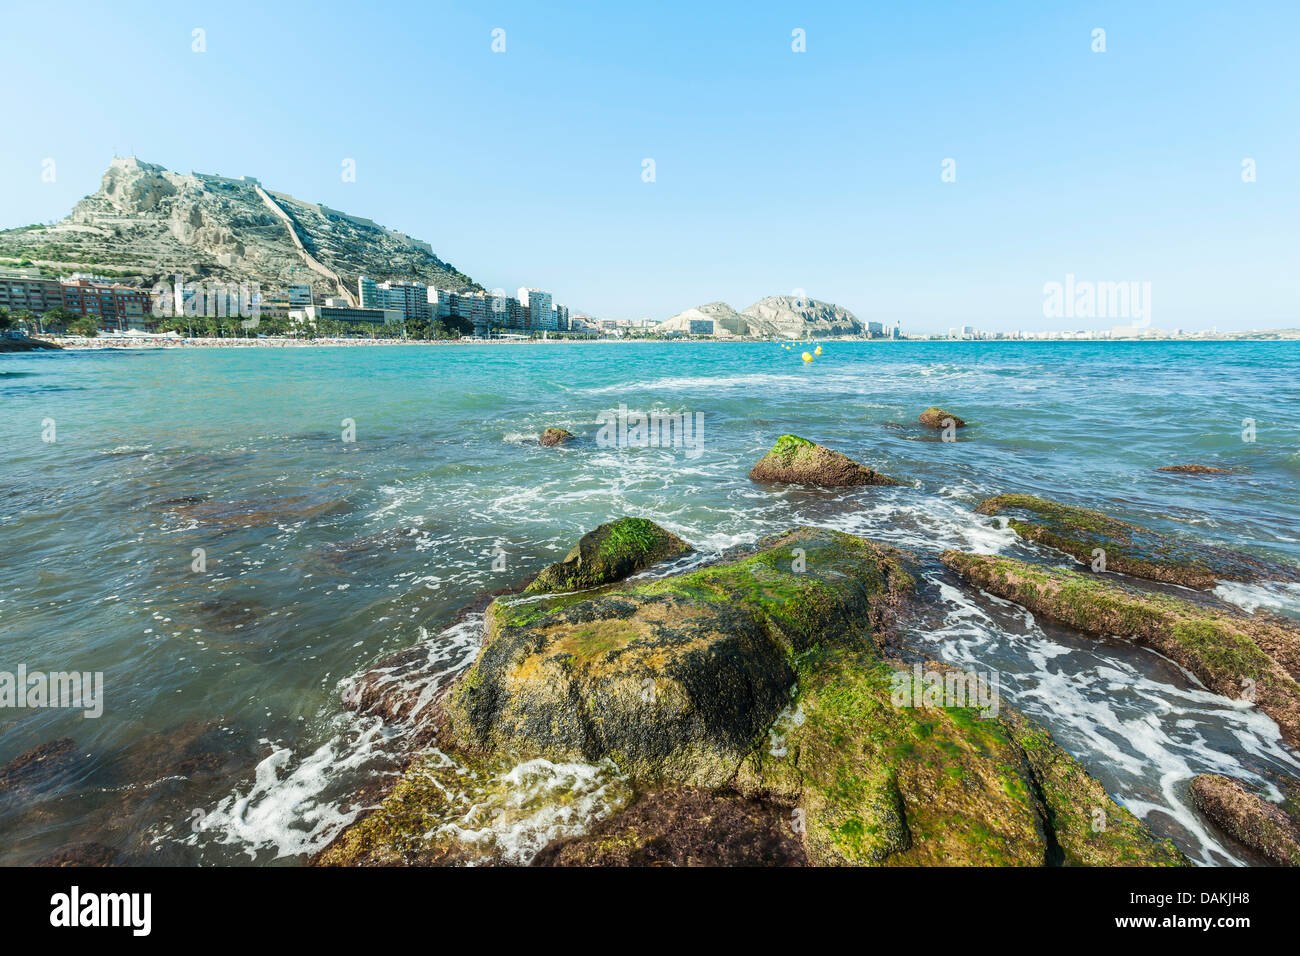 Alicante the popular summer holiday destination on Costa Blanca in Spain Stock Photo